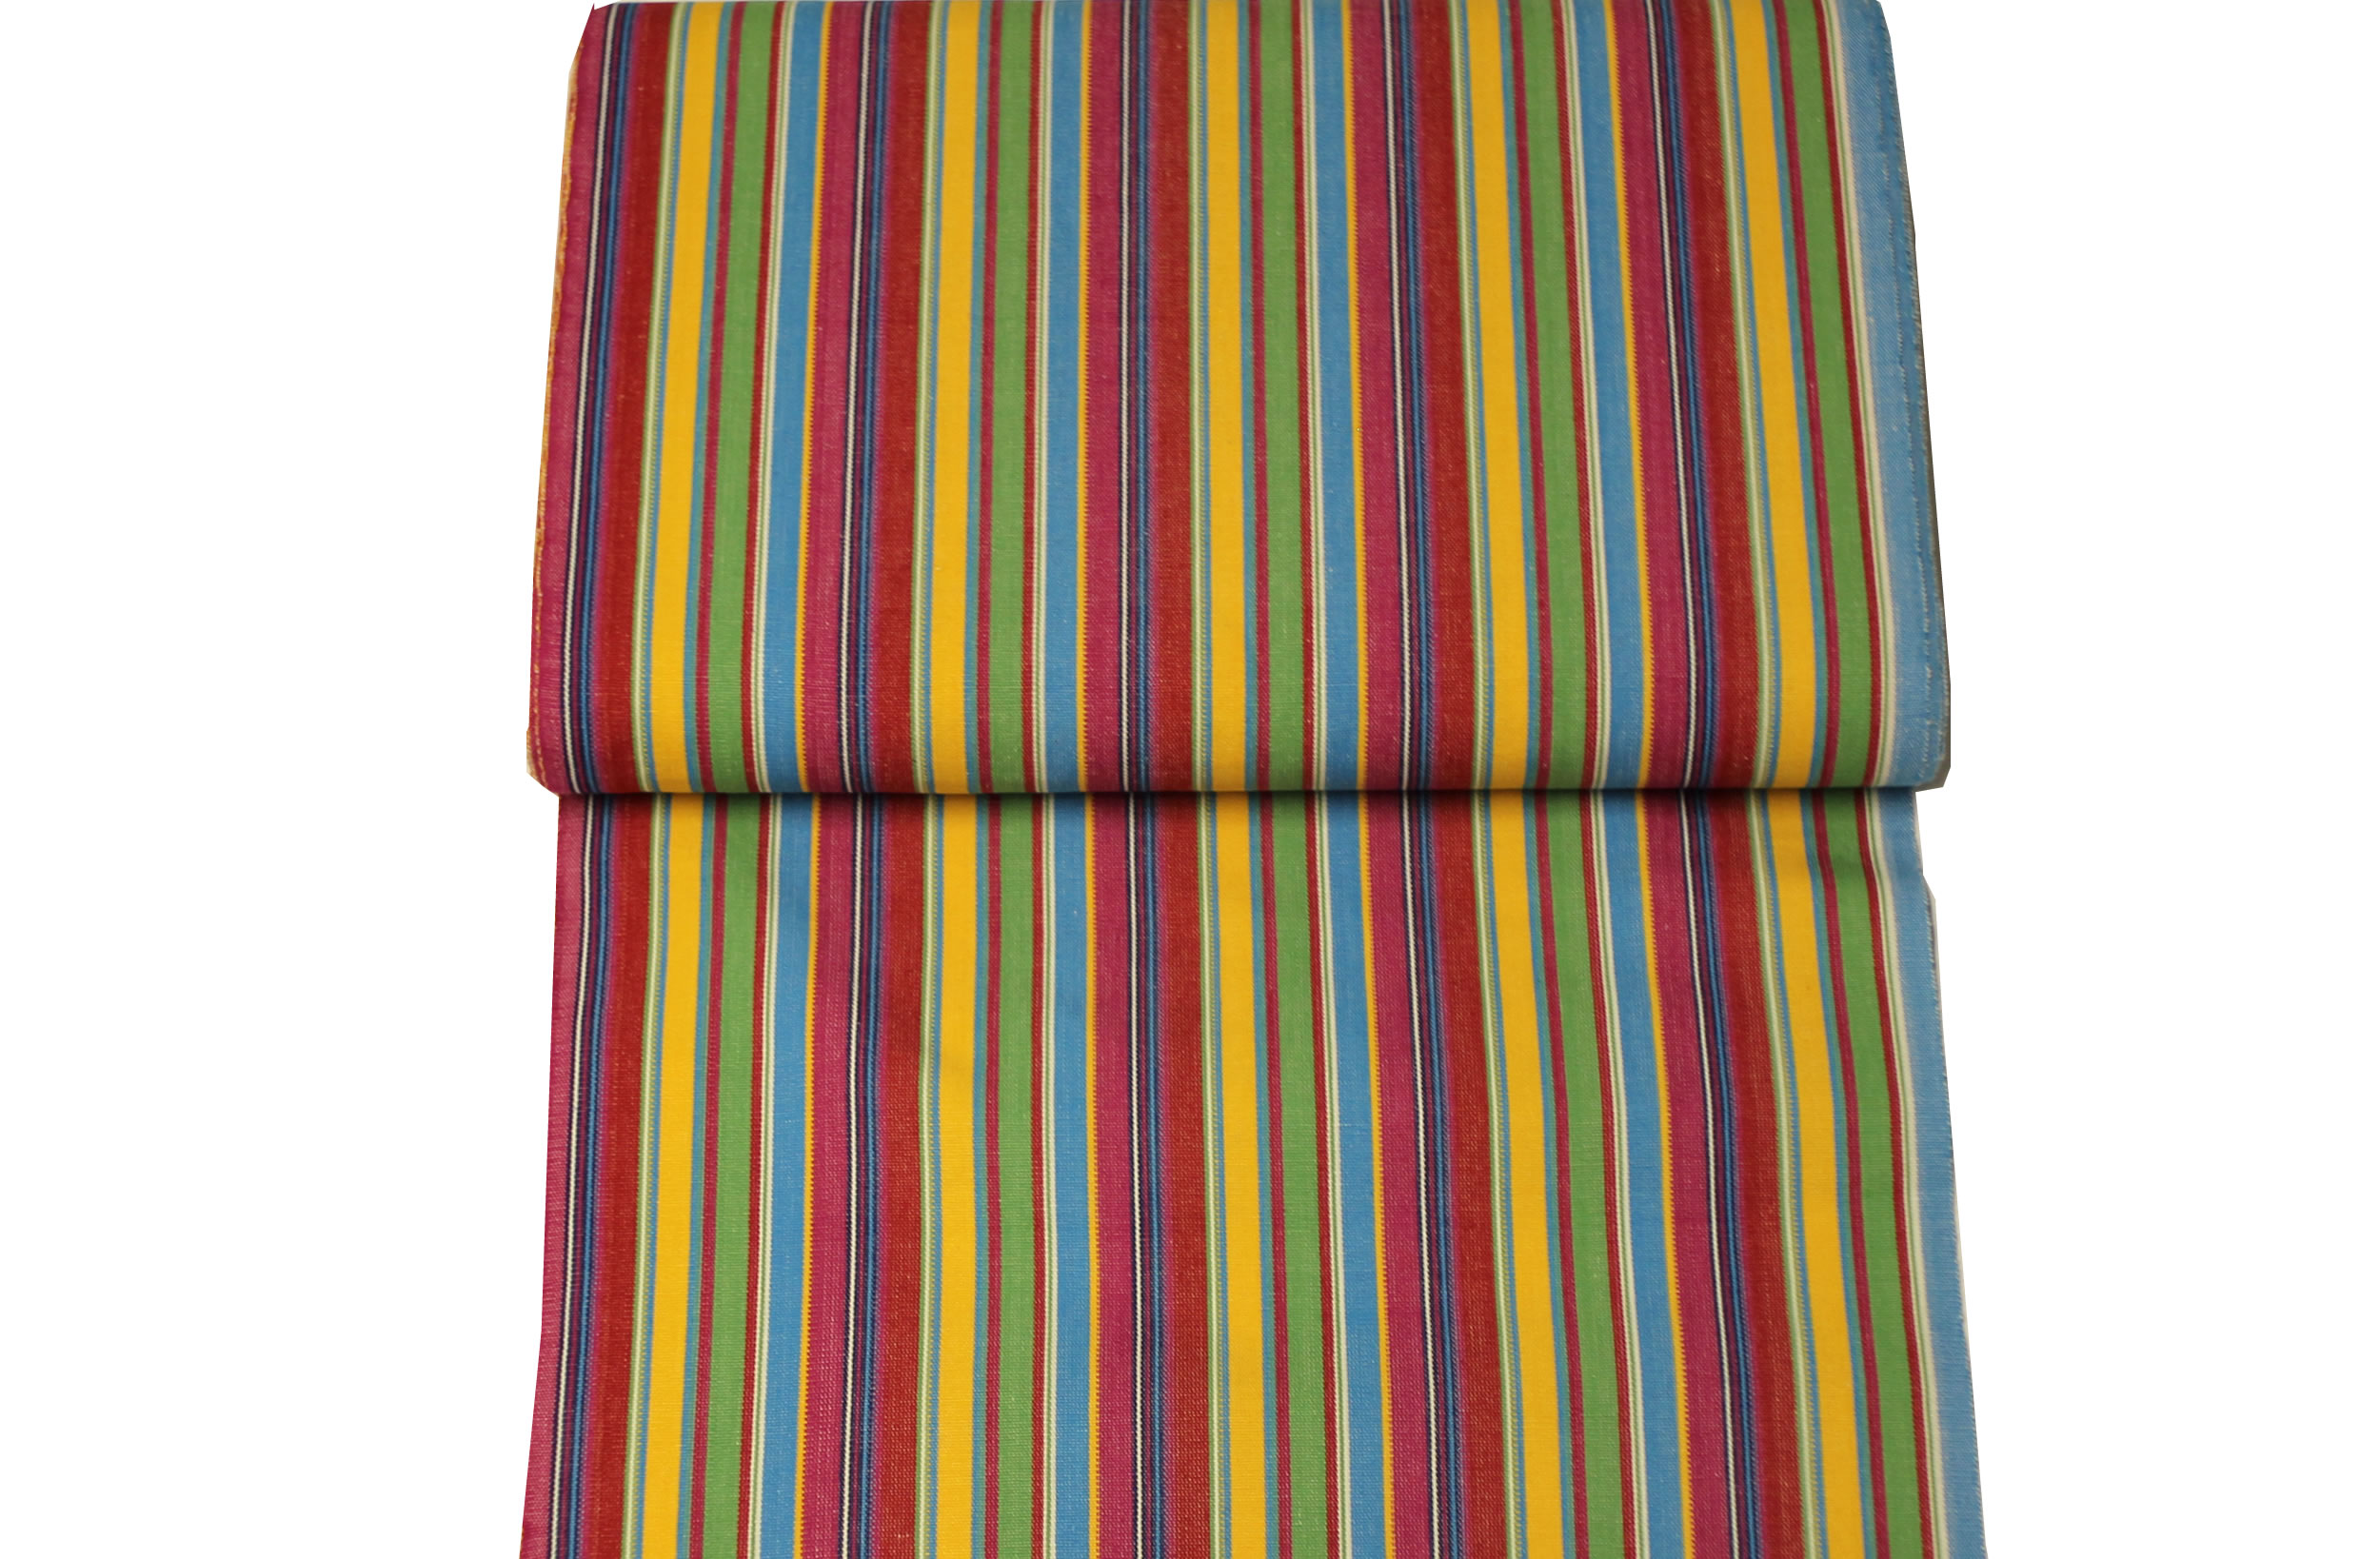 Pink Green Yellow Stripe Deck Chair Canvas Fabric